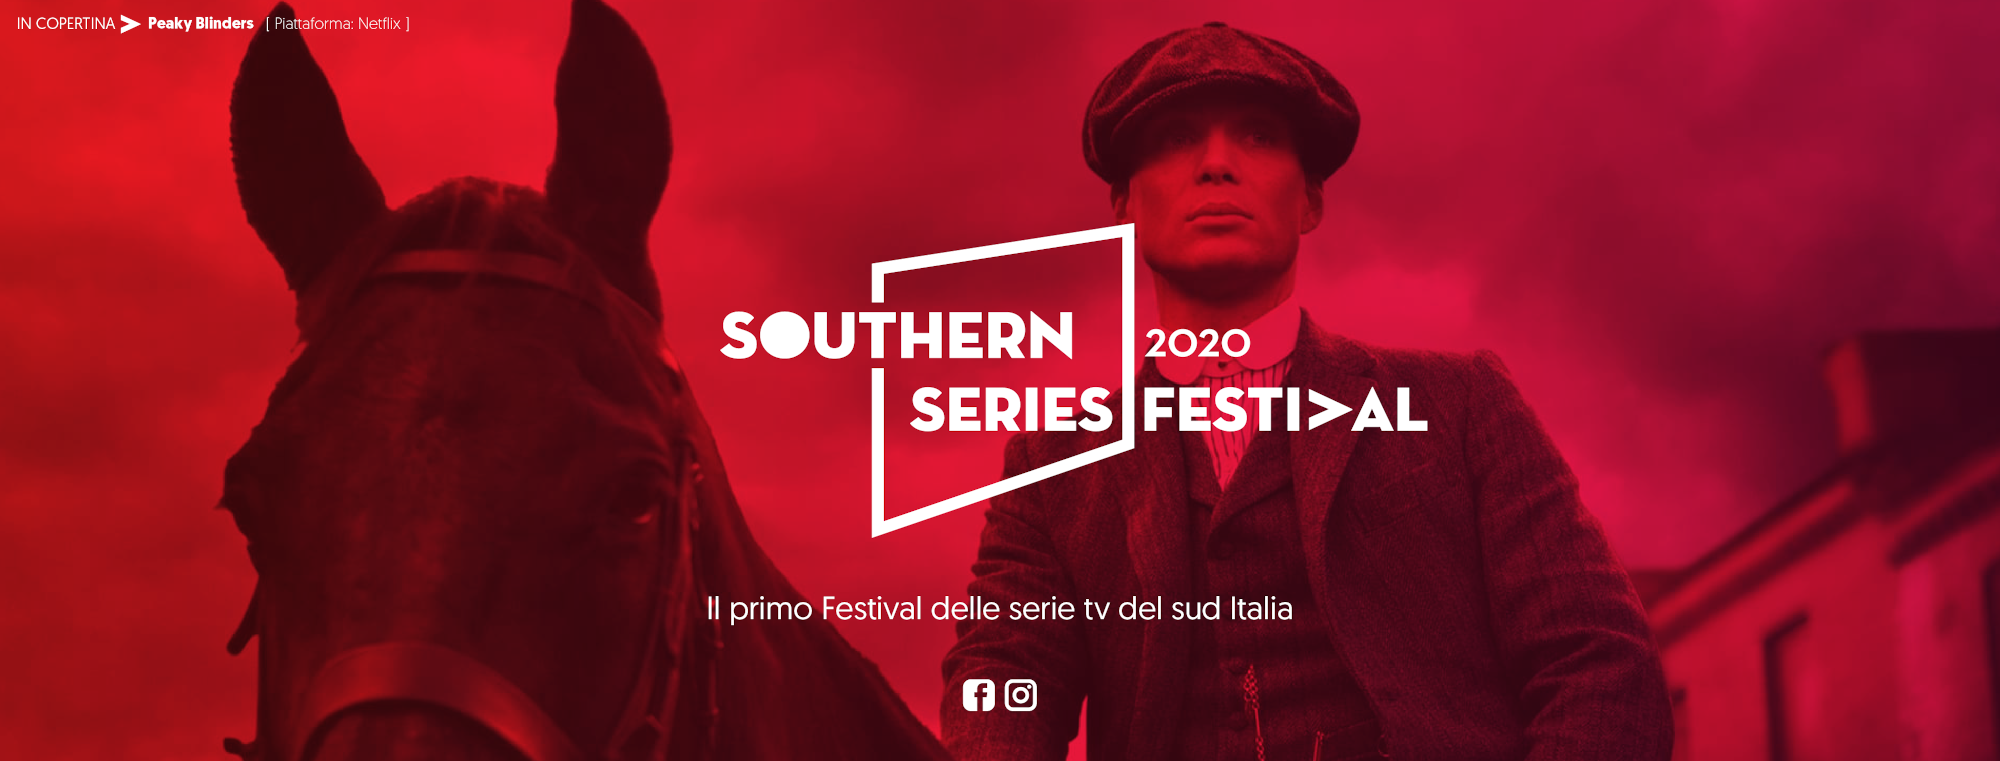 Southern Series Festival